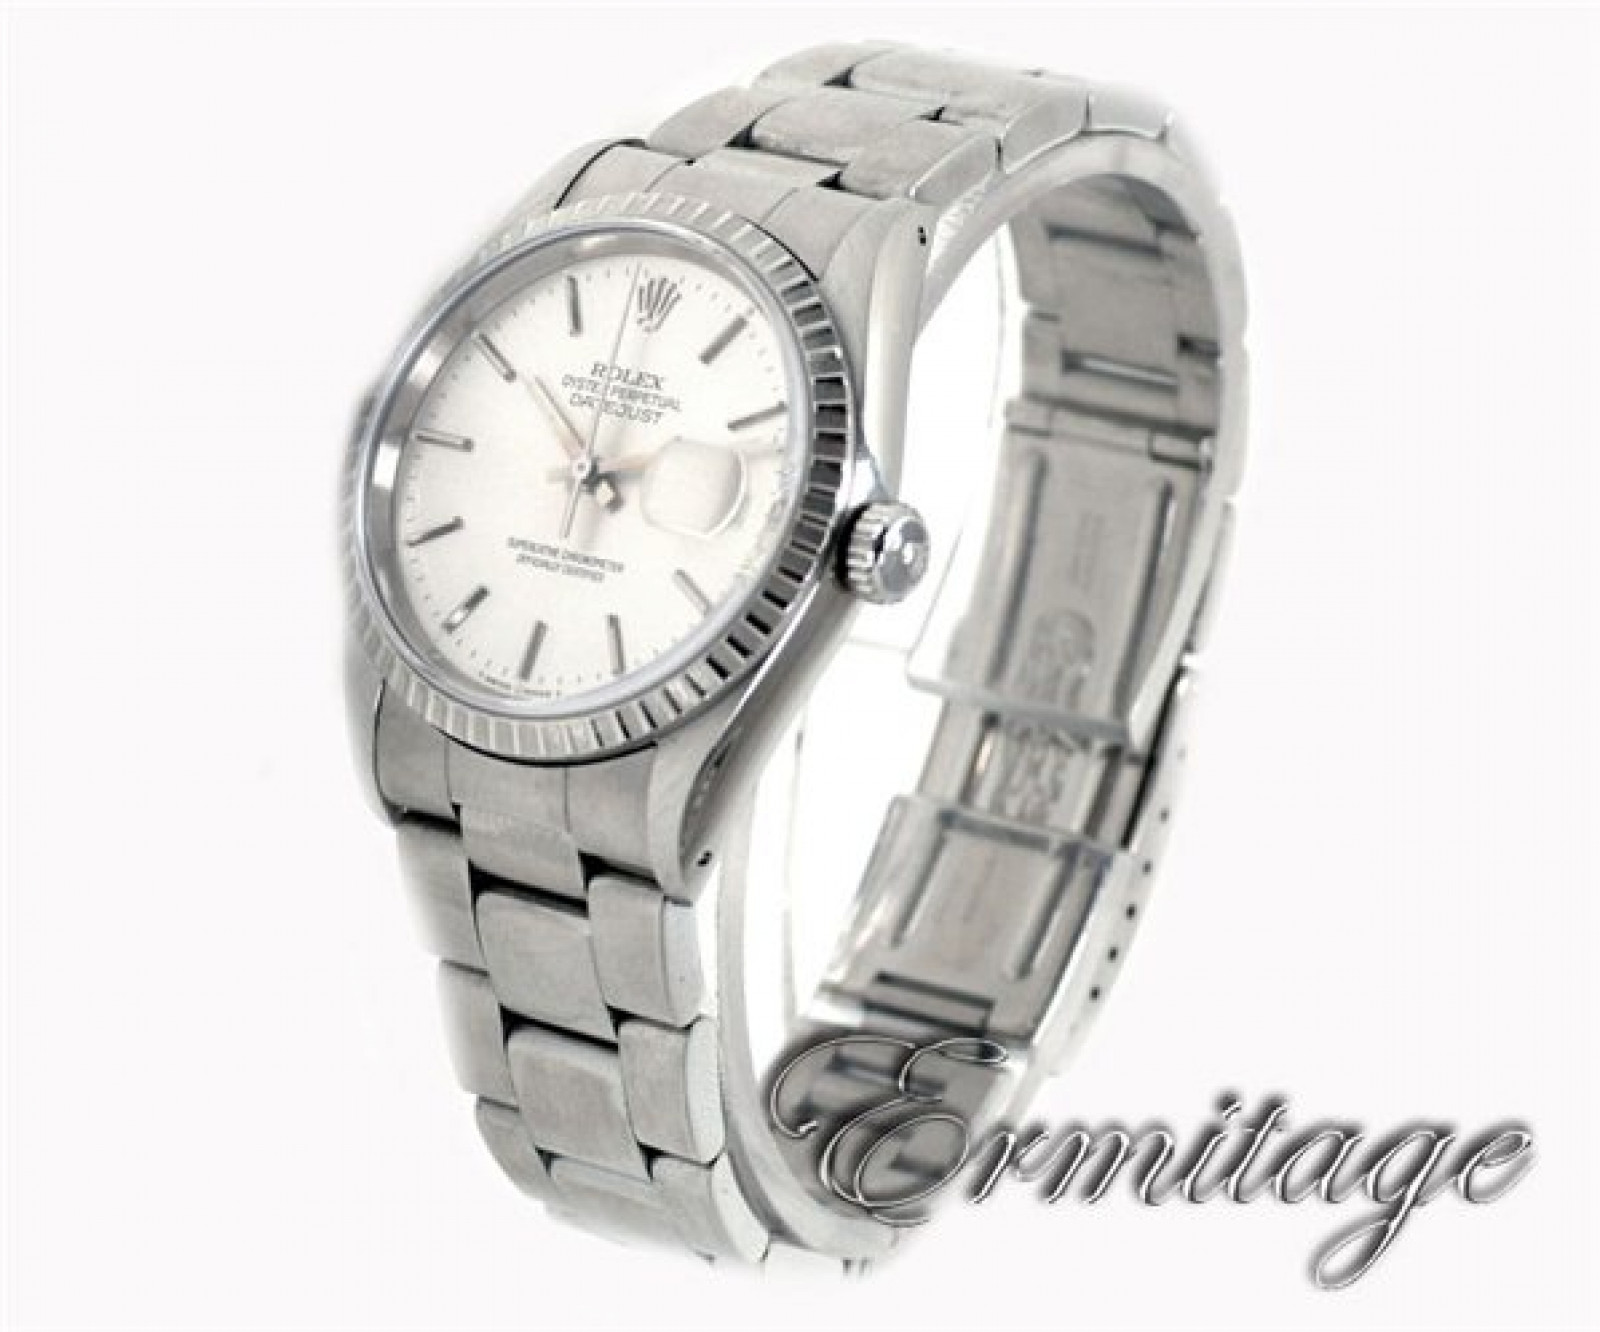 Stainless Steel Rolex 16620 Oyster Perpetual